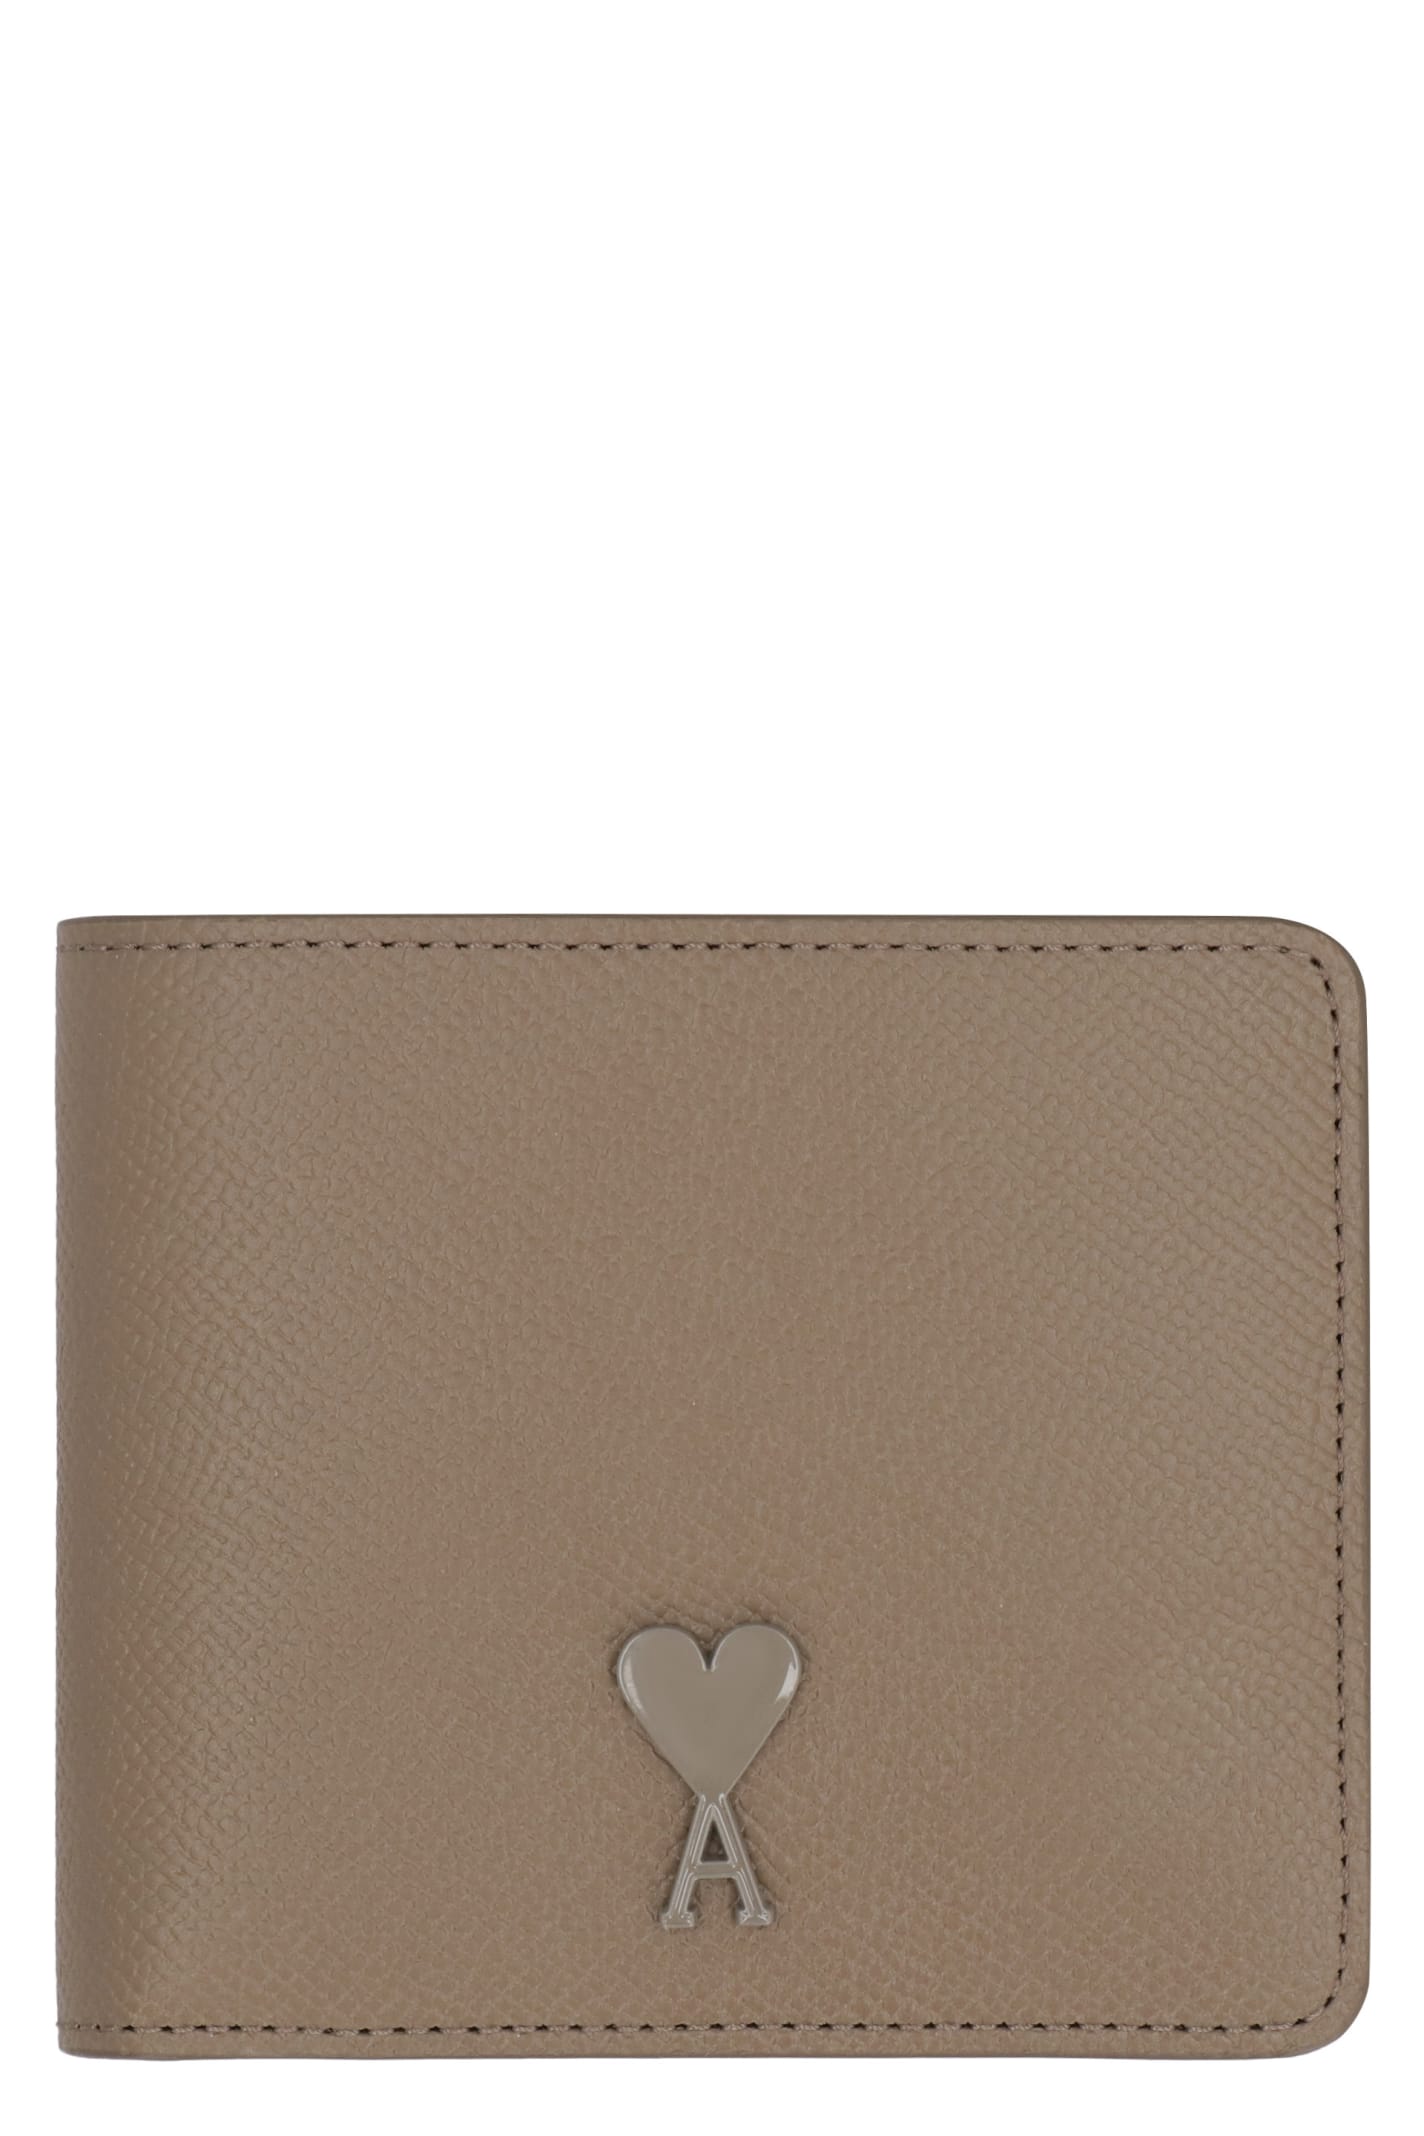 Shop Ami Alexandre Mattiussi Leather Wallet In Taupe